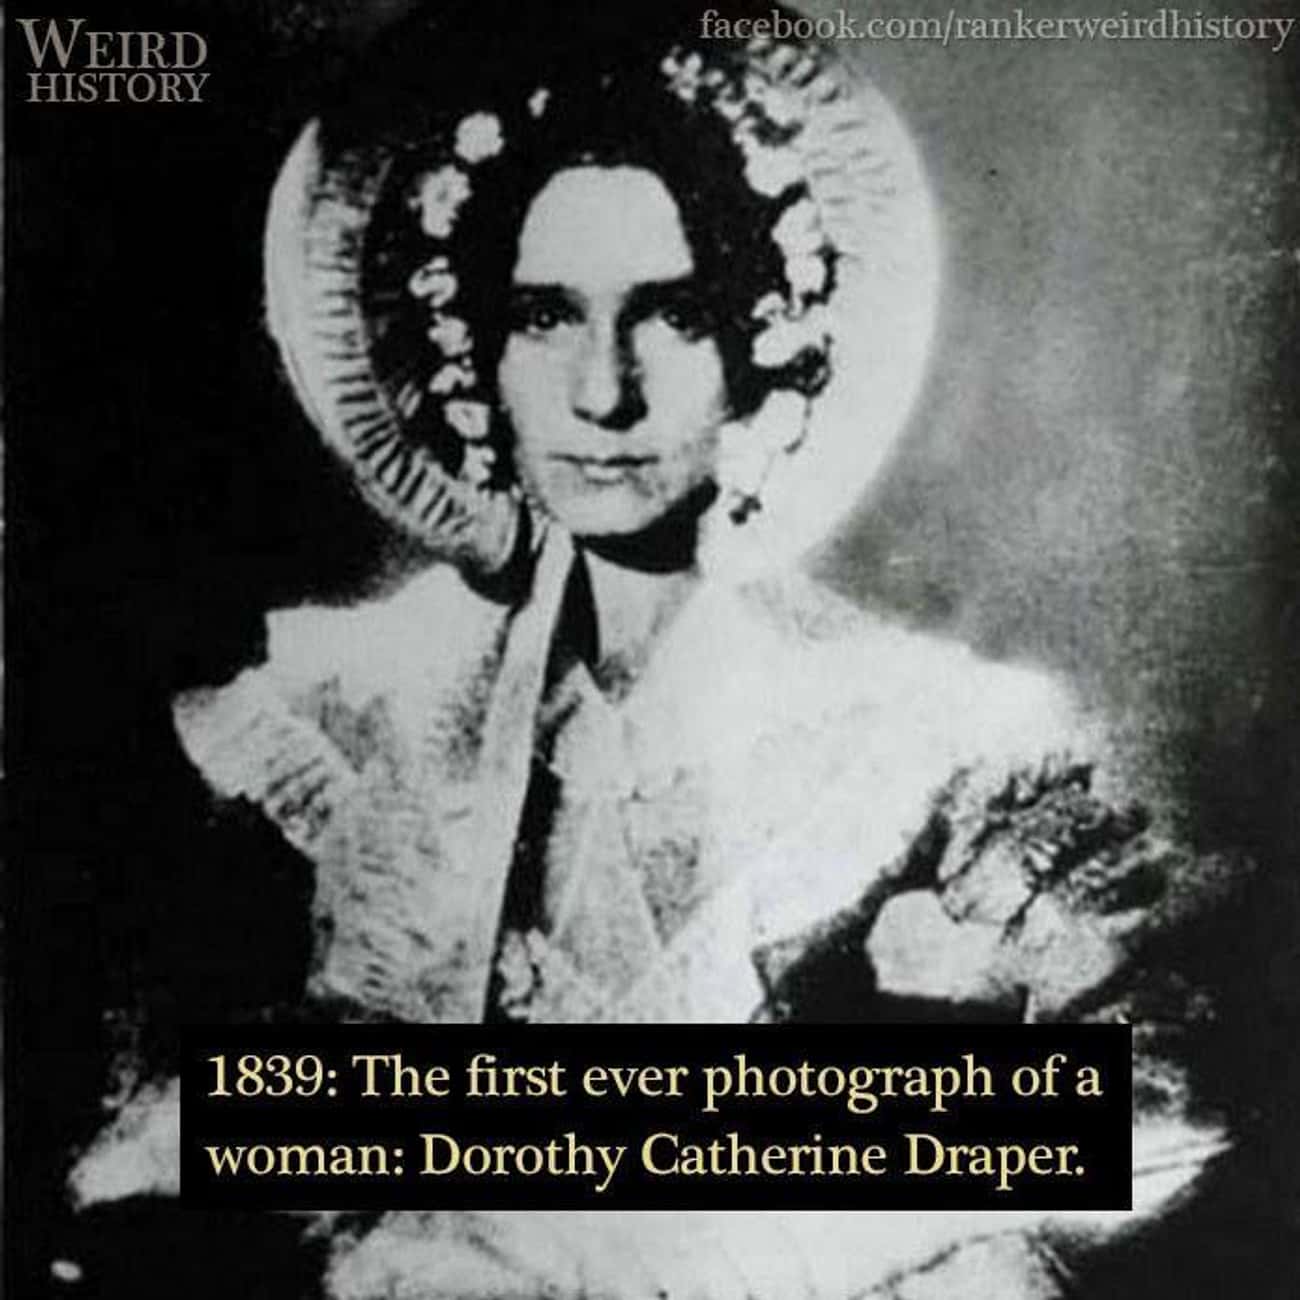 1839: Dorothy Catherine Draper, The First Woman Ever Photographed